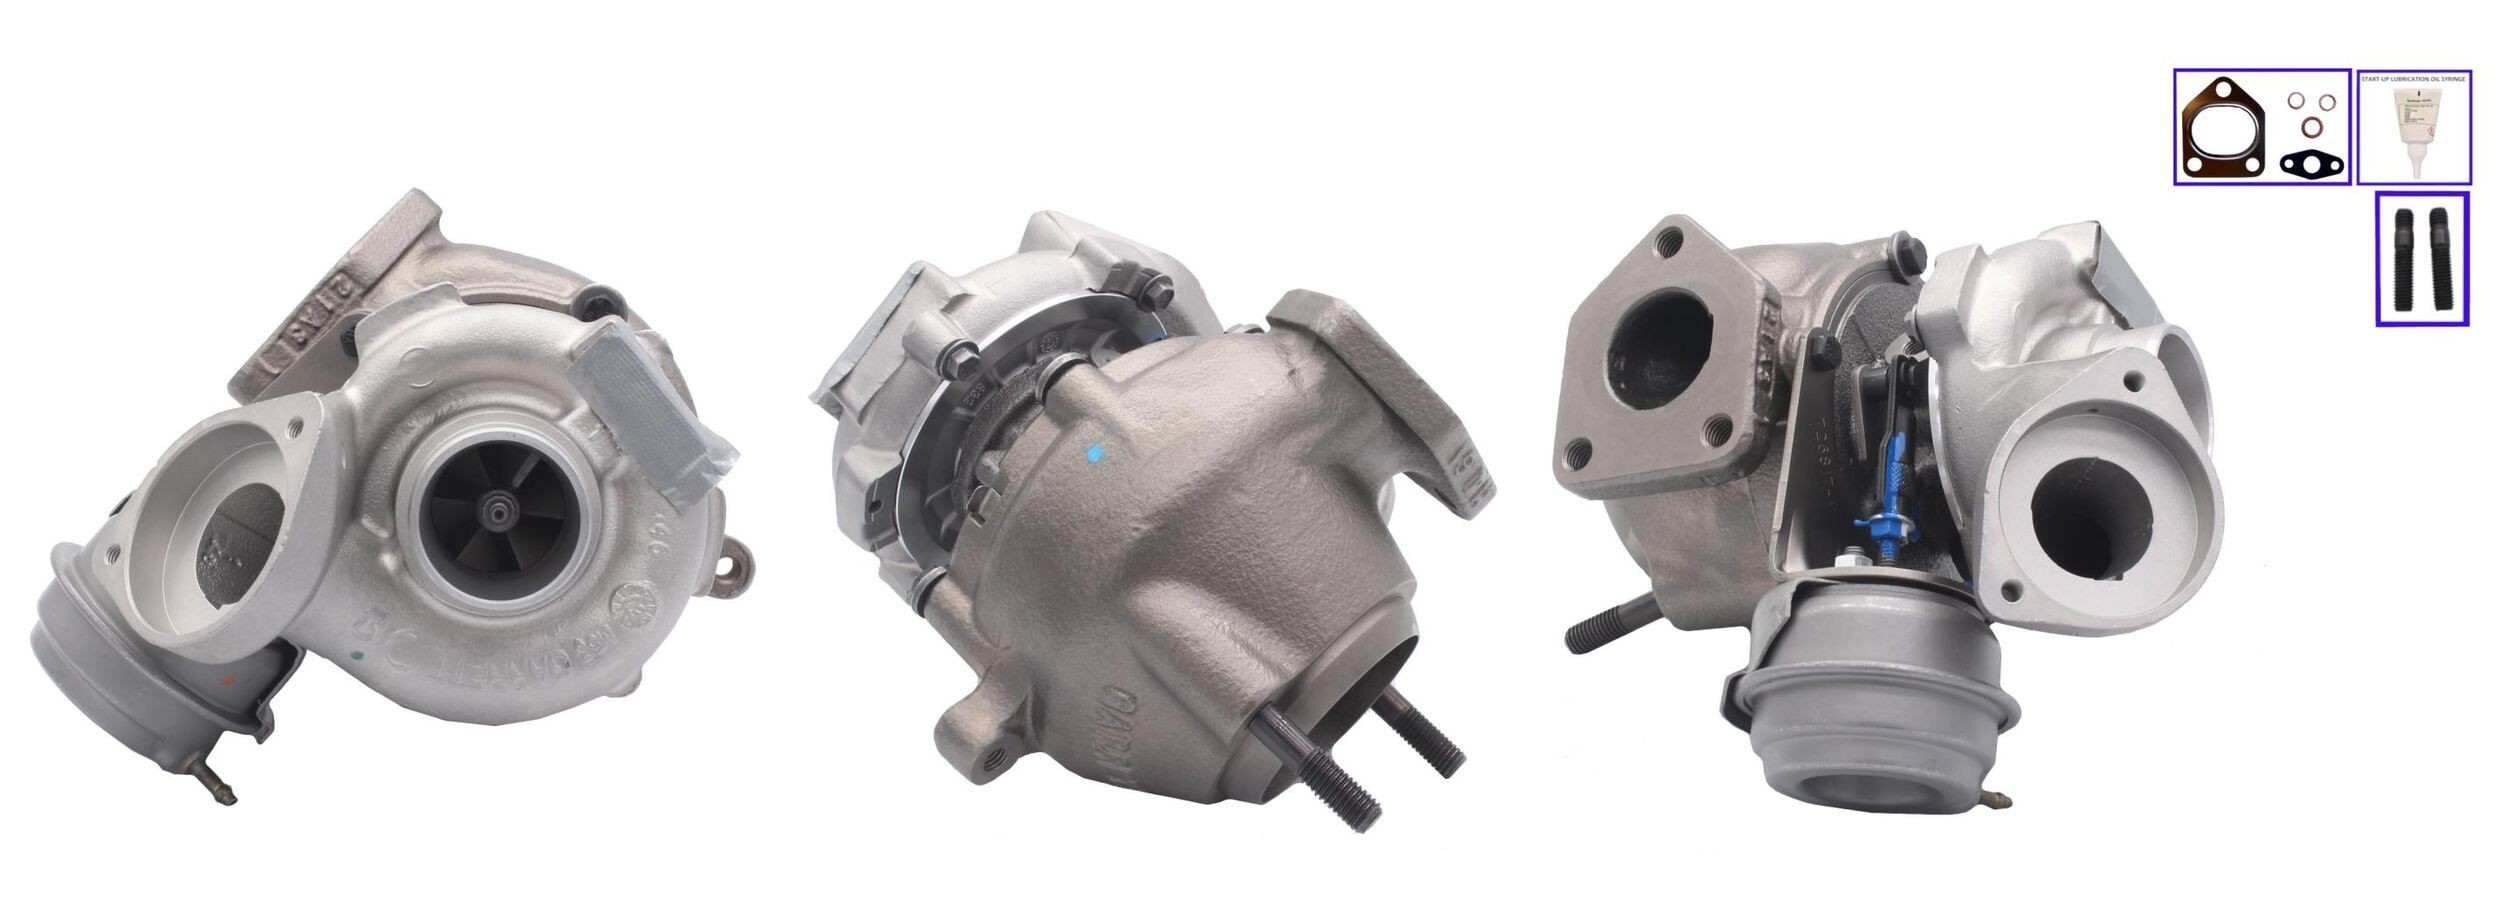 LUCAS LTRPA7504312 Turbocharger Exhaust Turbocharger, Pneumatically controlled actuator, with gaskets/seals